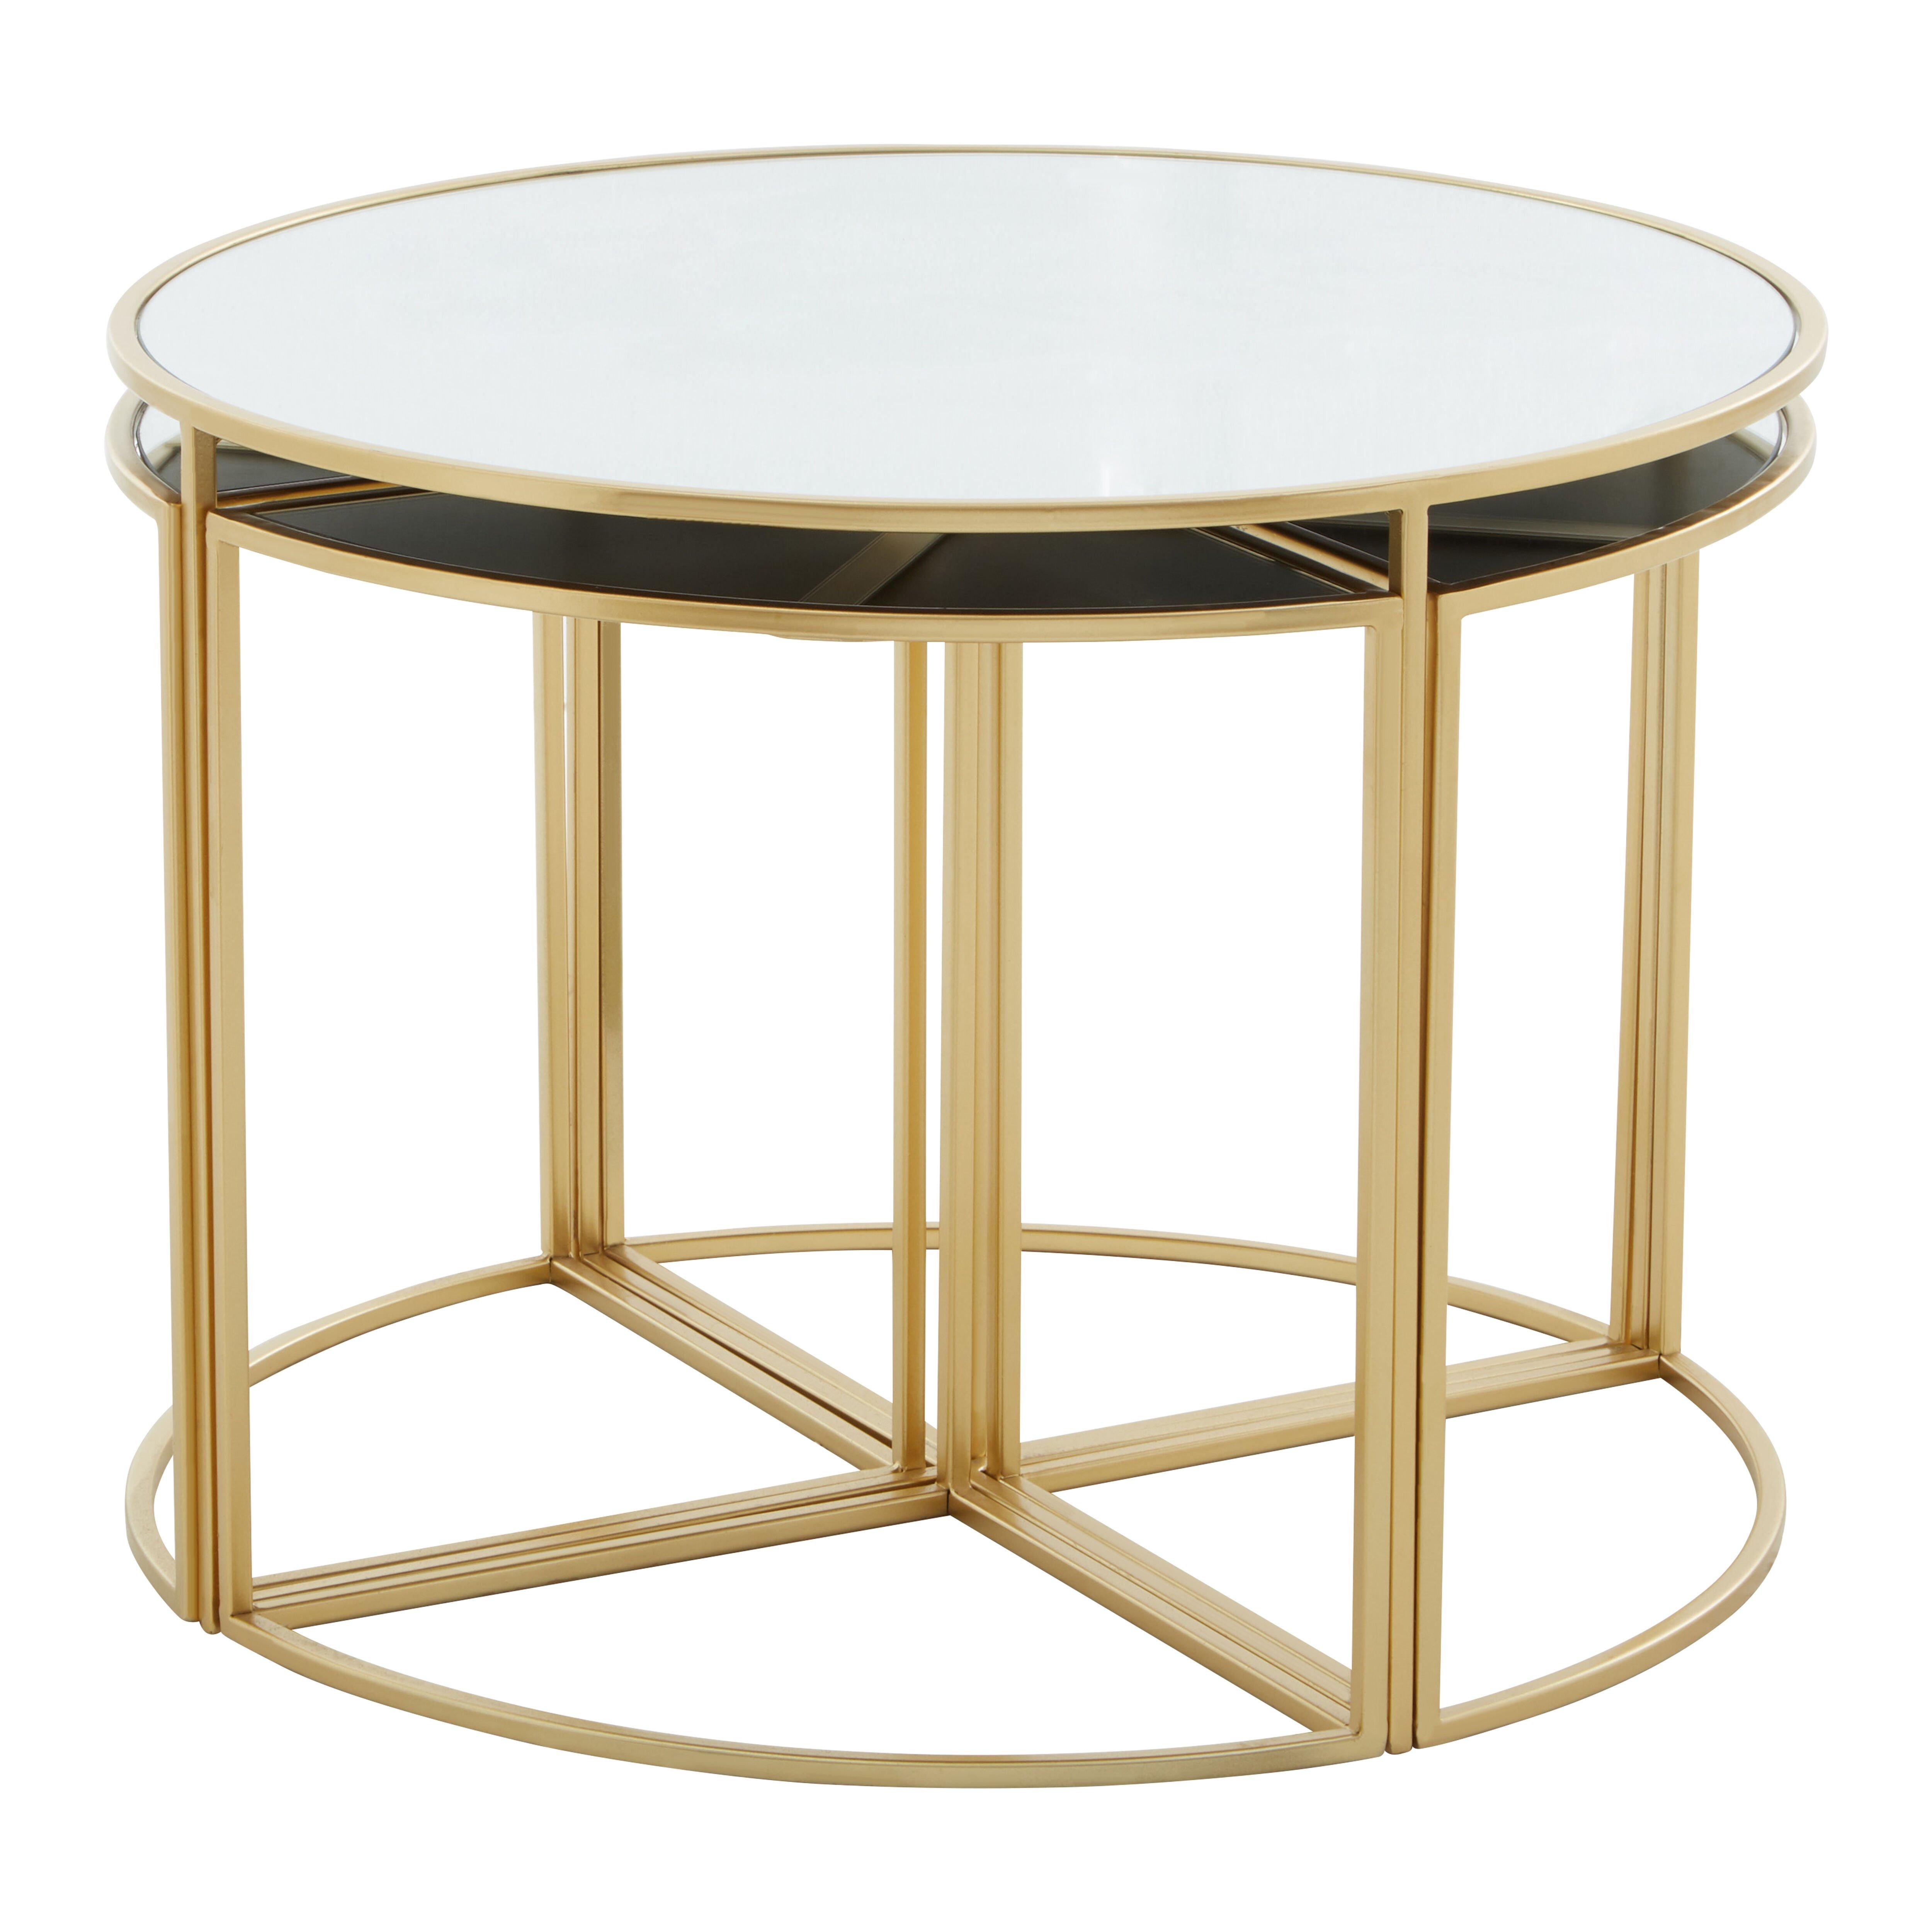 Jolie 5 Piece Mirrored Top Nesting Tables Set with Gold Frame